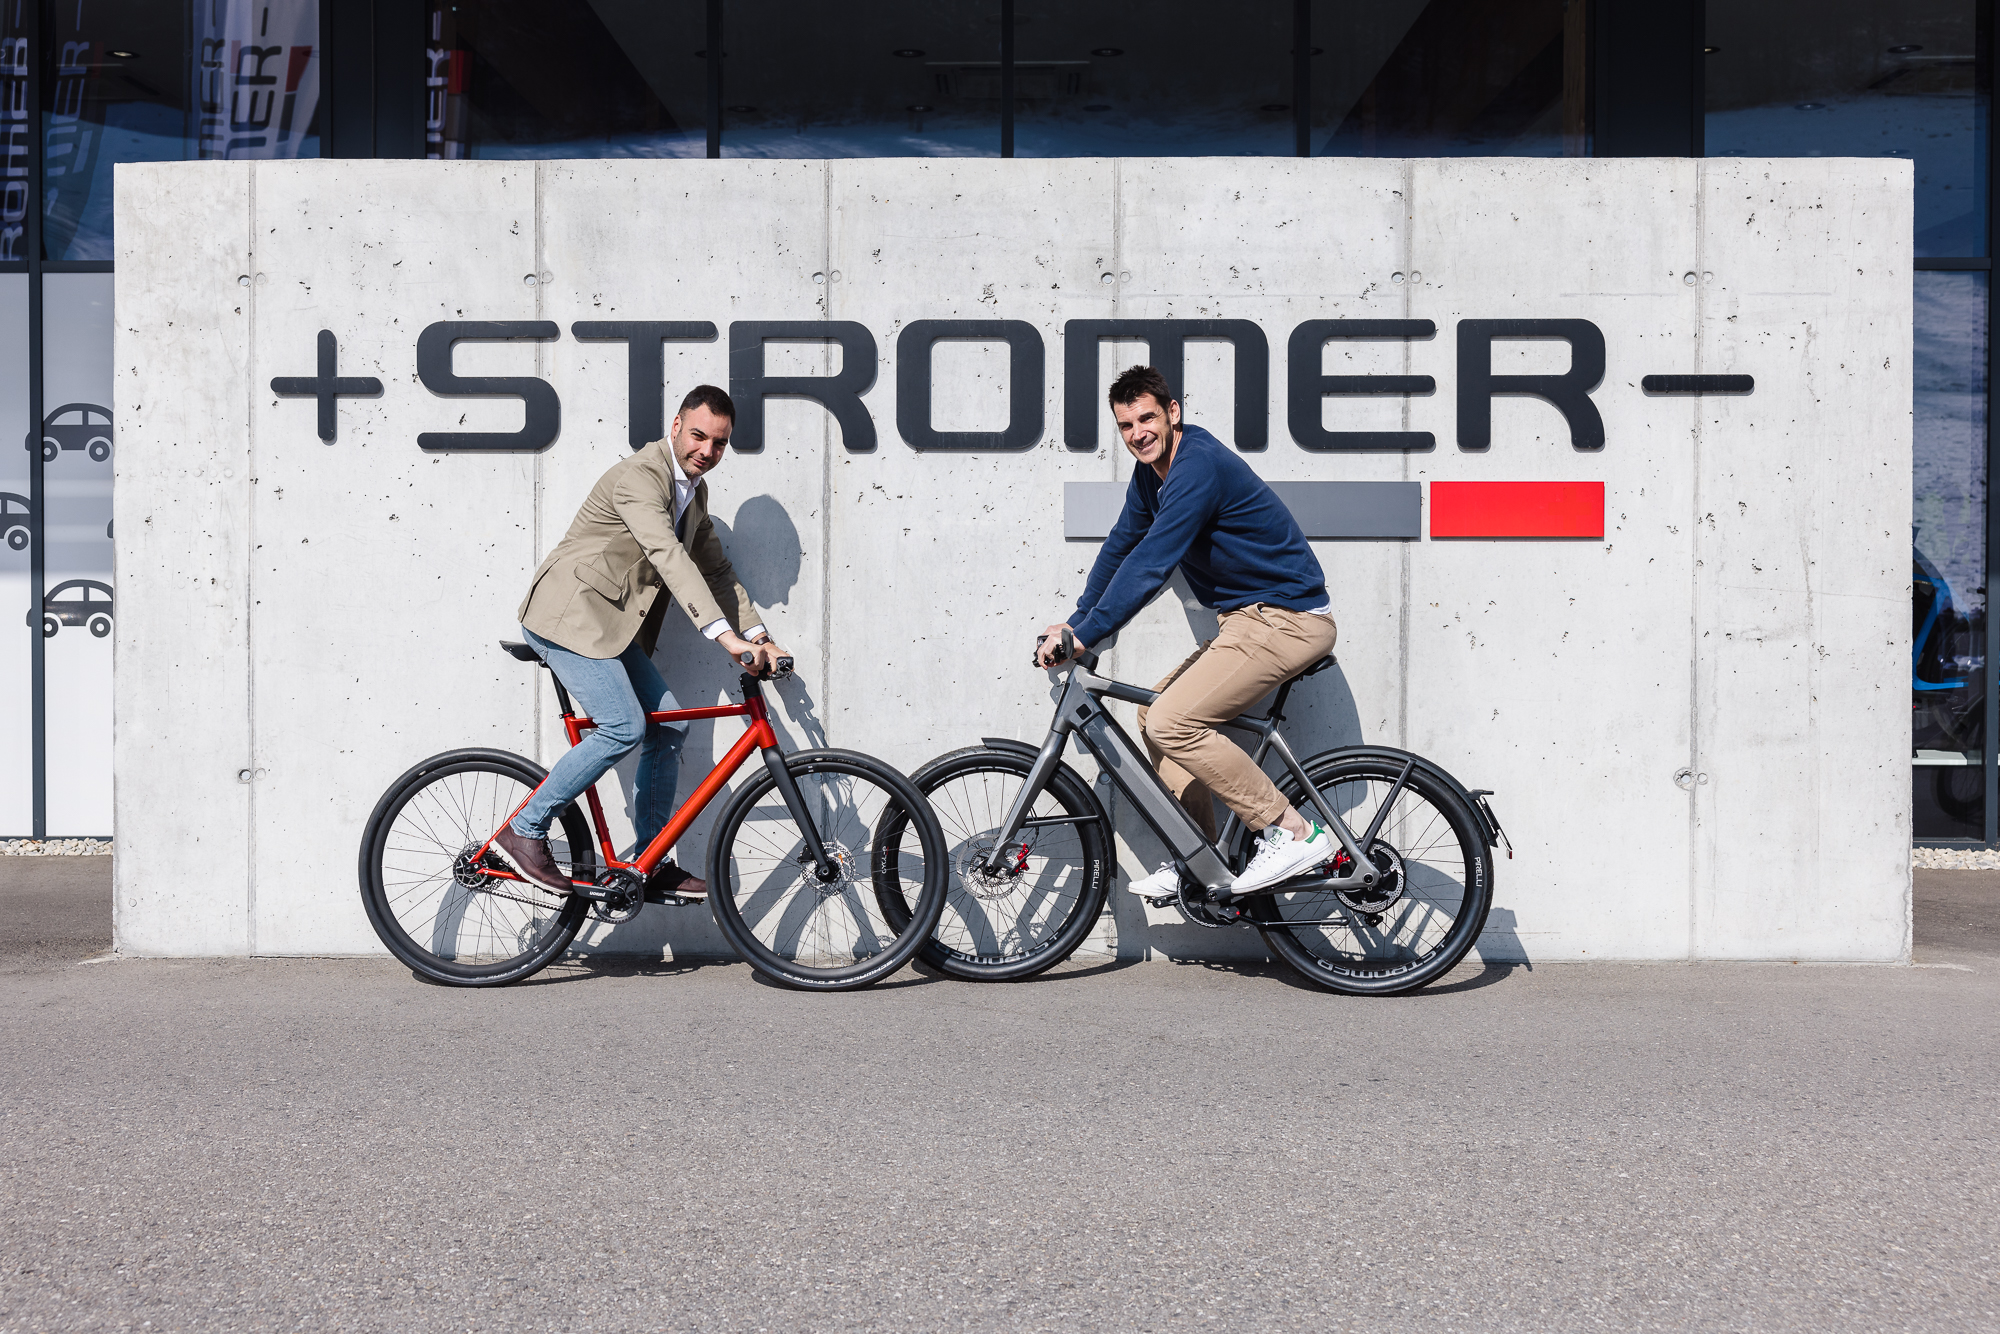 Alliance formed with Stromer